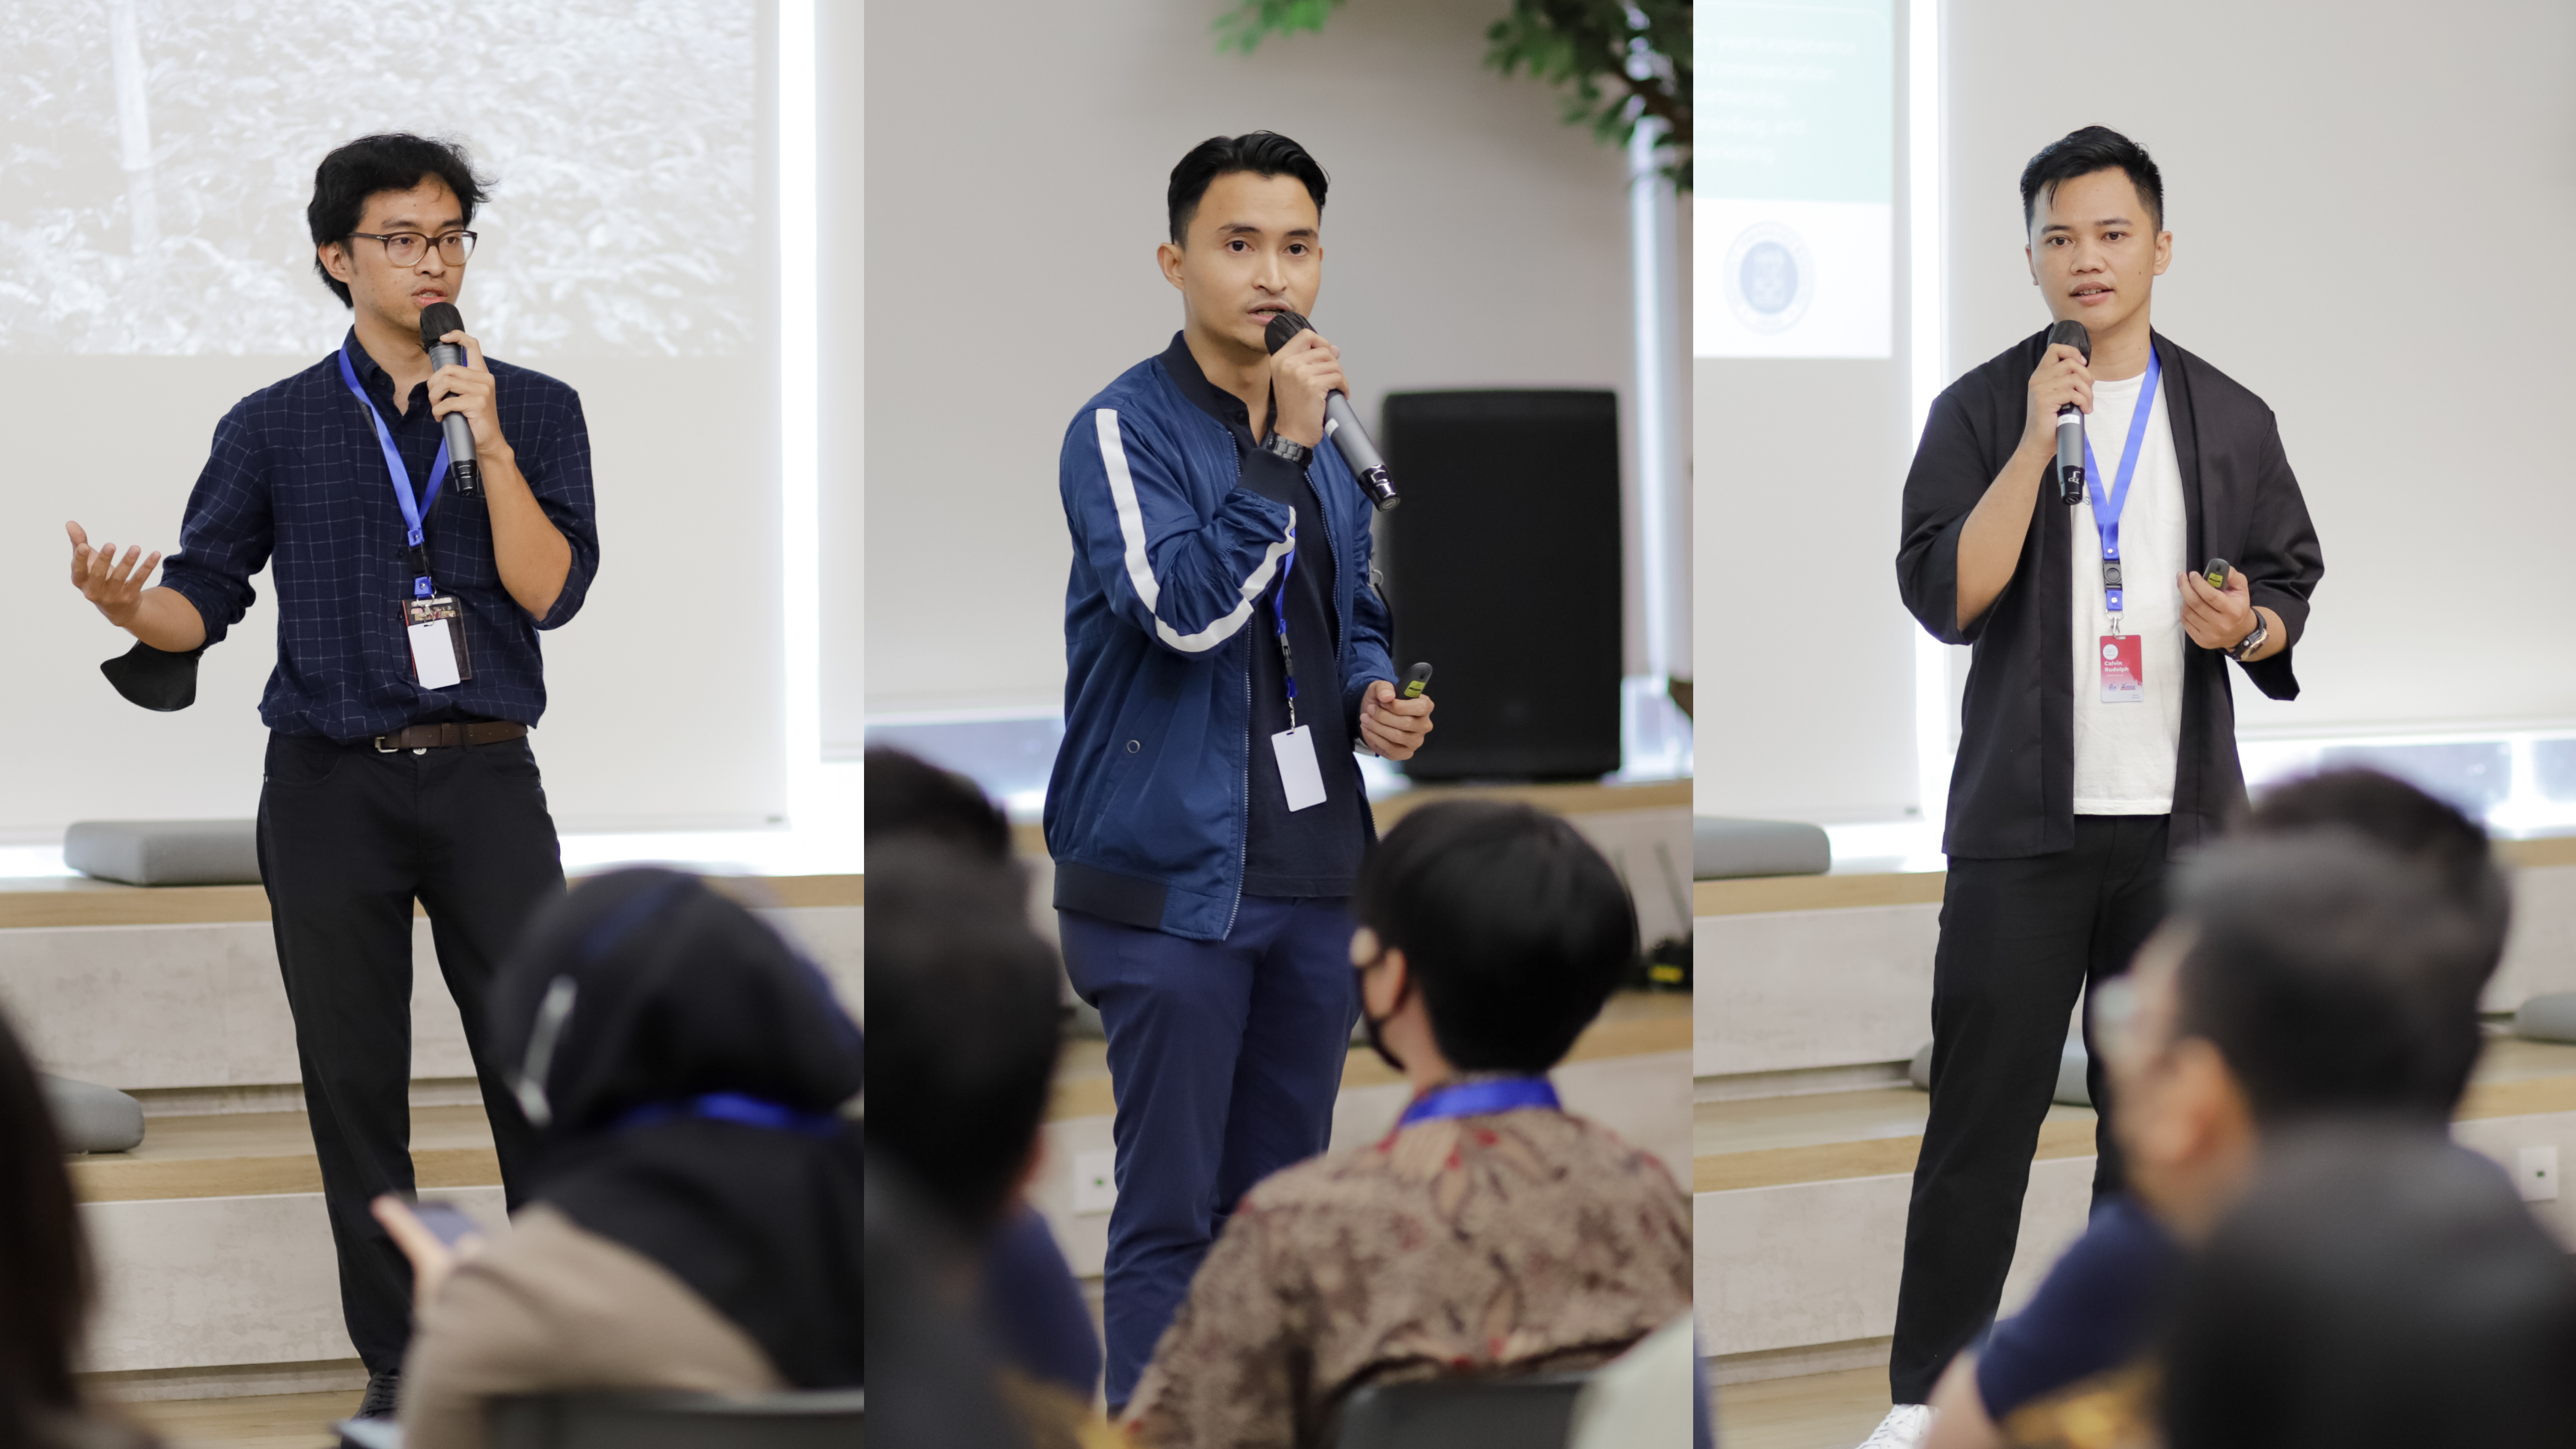 Left to right, Arka Irfani, CEO of Bell Society, Agung Bimo, CEO of CarbonEthics, and Calvin Rudolph, COO of Surplus Indonesia, showcased their business during the pitching session, then continued with QnA session.